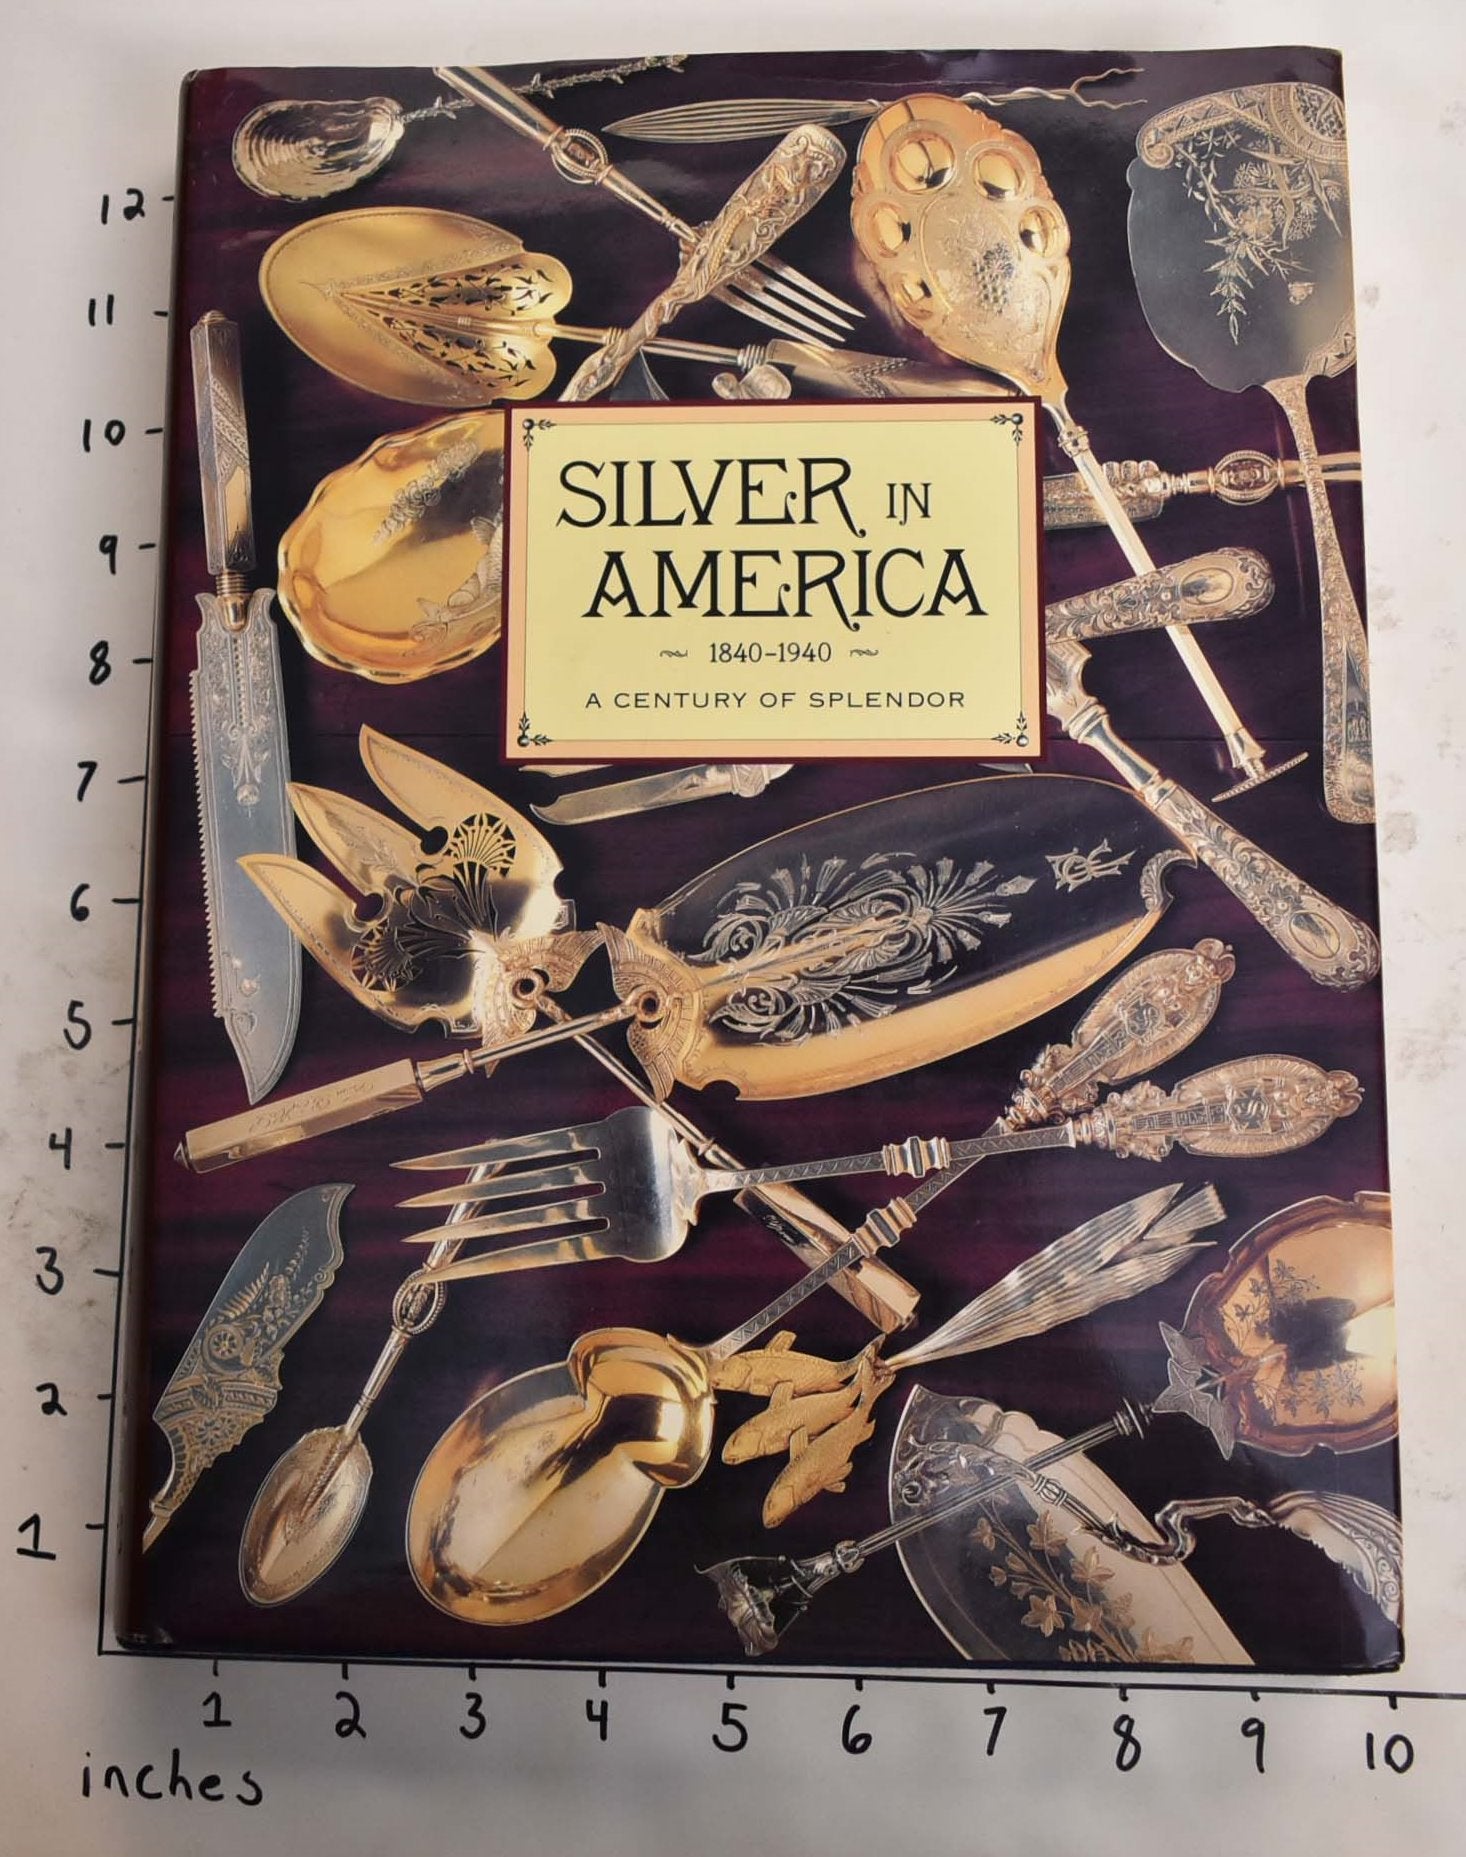 Silver in America, 1840-1940: A Century of Splendor by Charles L. Venable  on Mullen Books